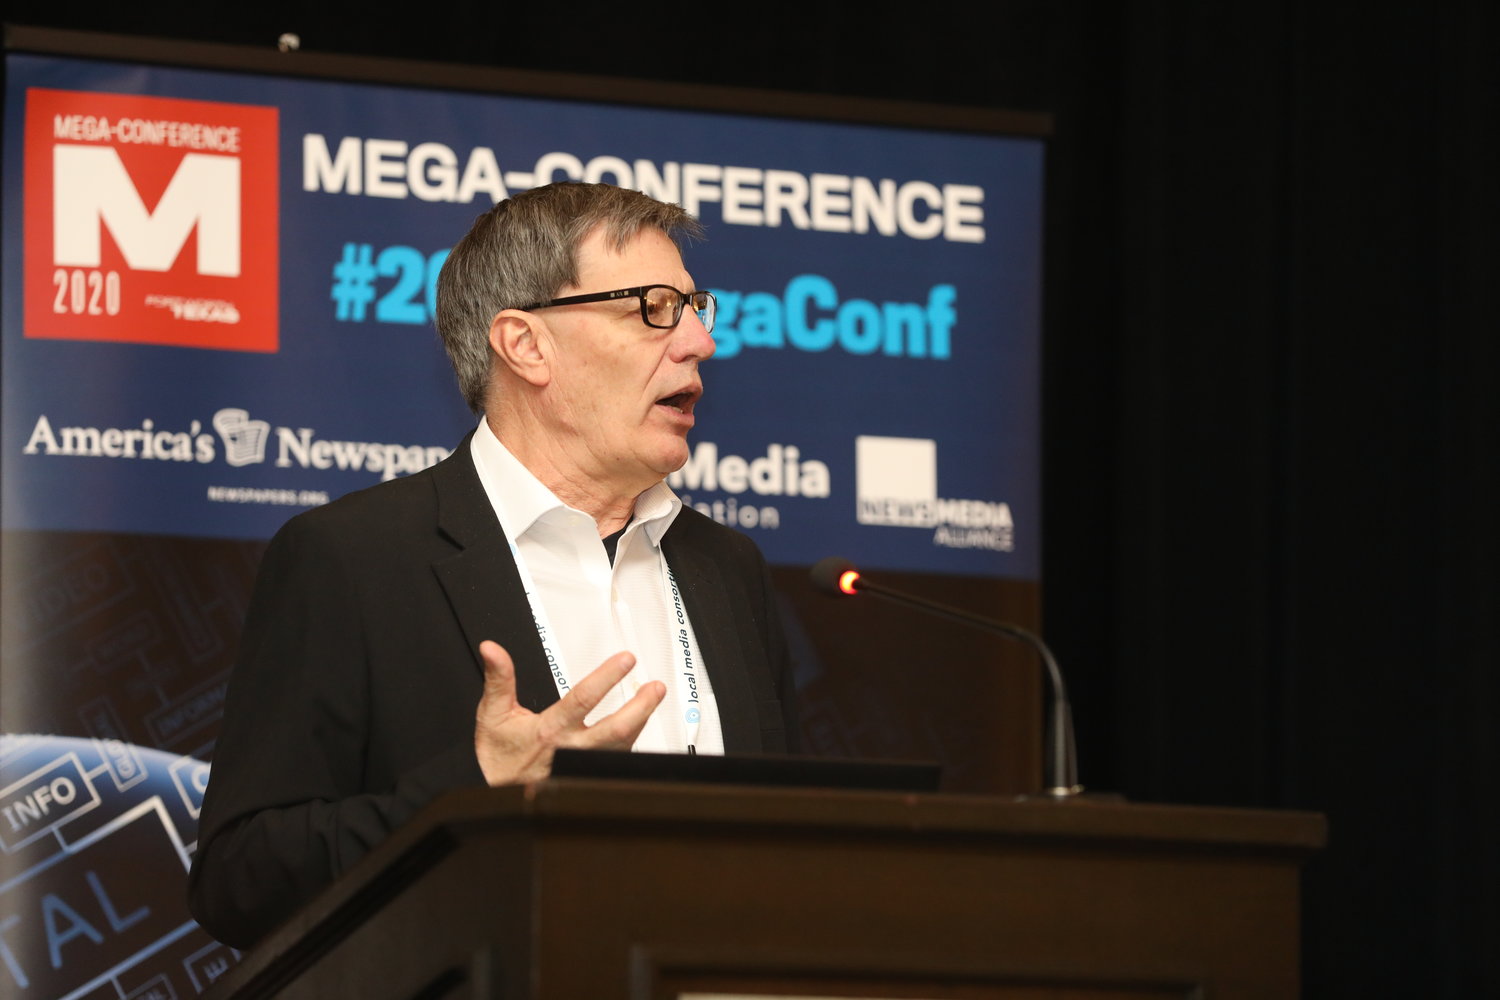 Jim Stevenson of Spinal Column Newsweekly Media at the 2020 Mega-Conference. (Photo by Bob Booth)